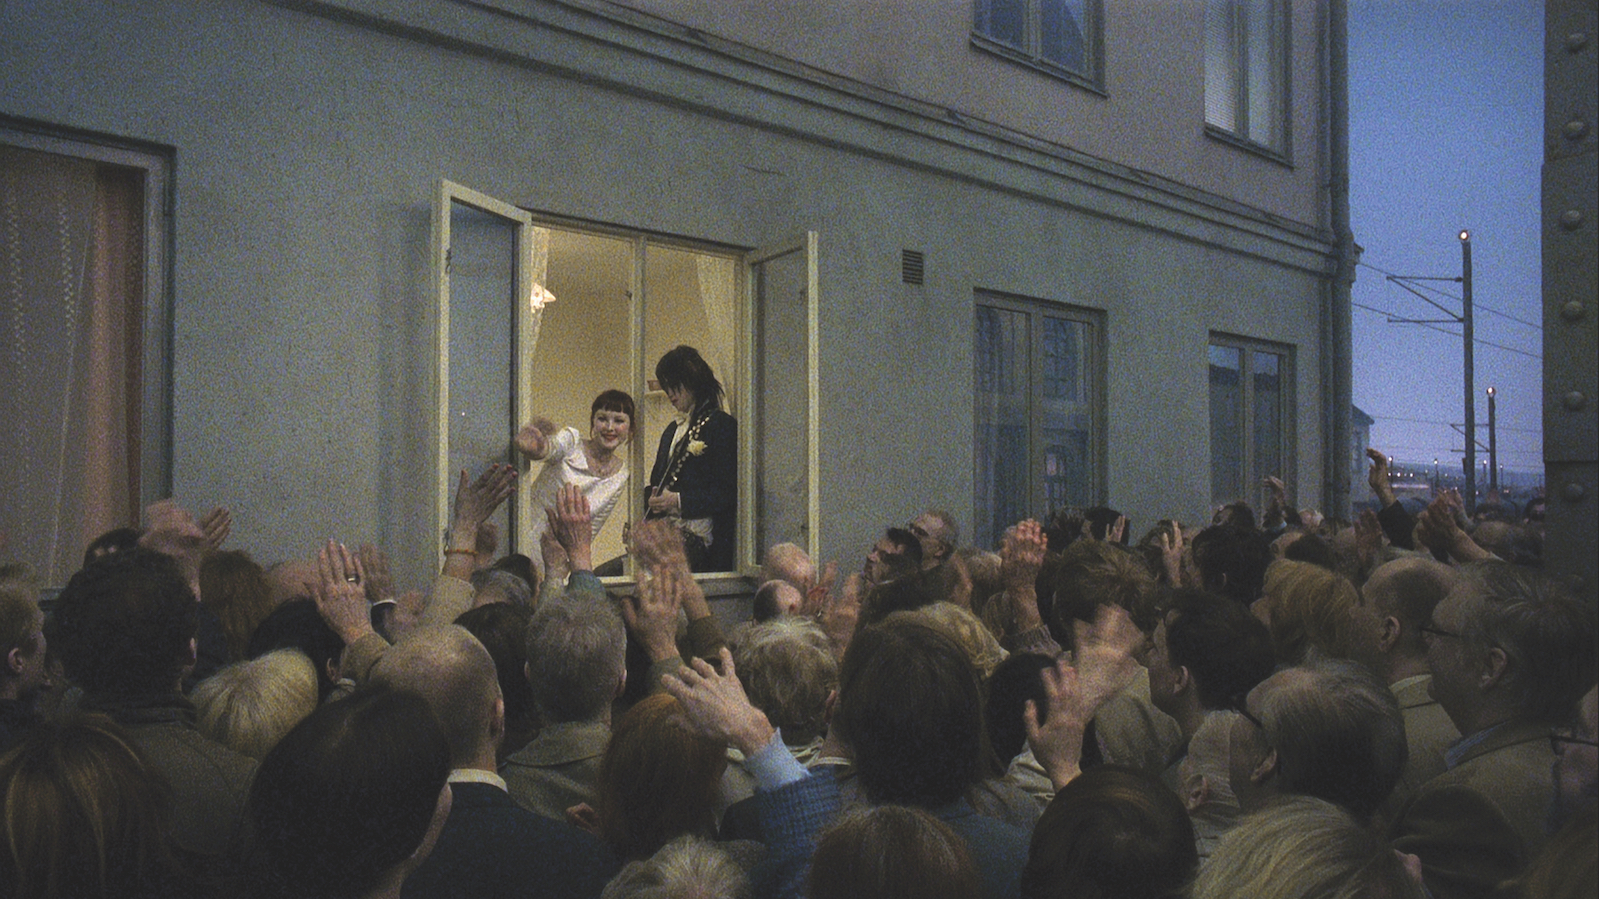 A newly married couple, she in a wedding dress and he in a tux and holding a guitar, stand near an open window in a city apartment waving at a crowd of people on the street